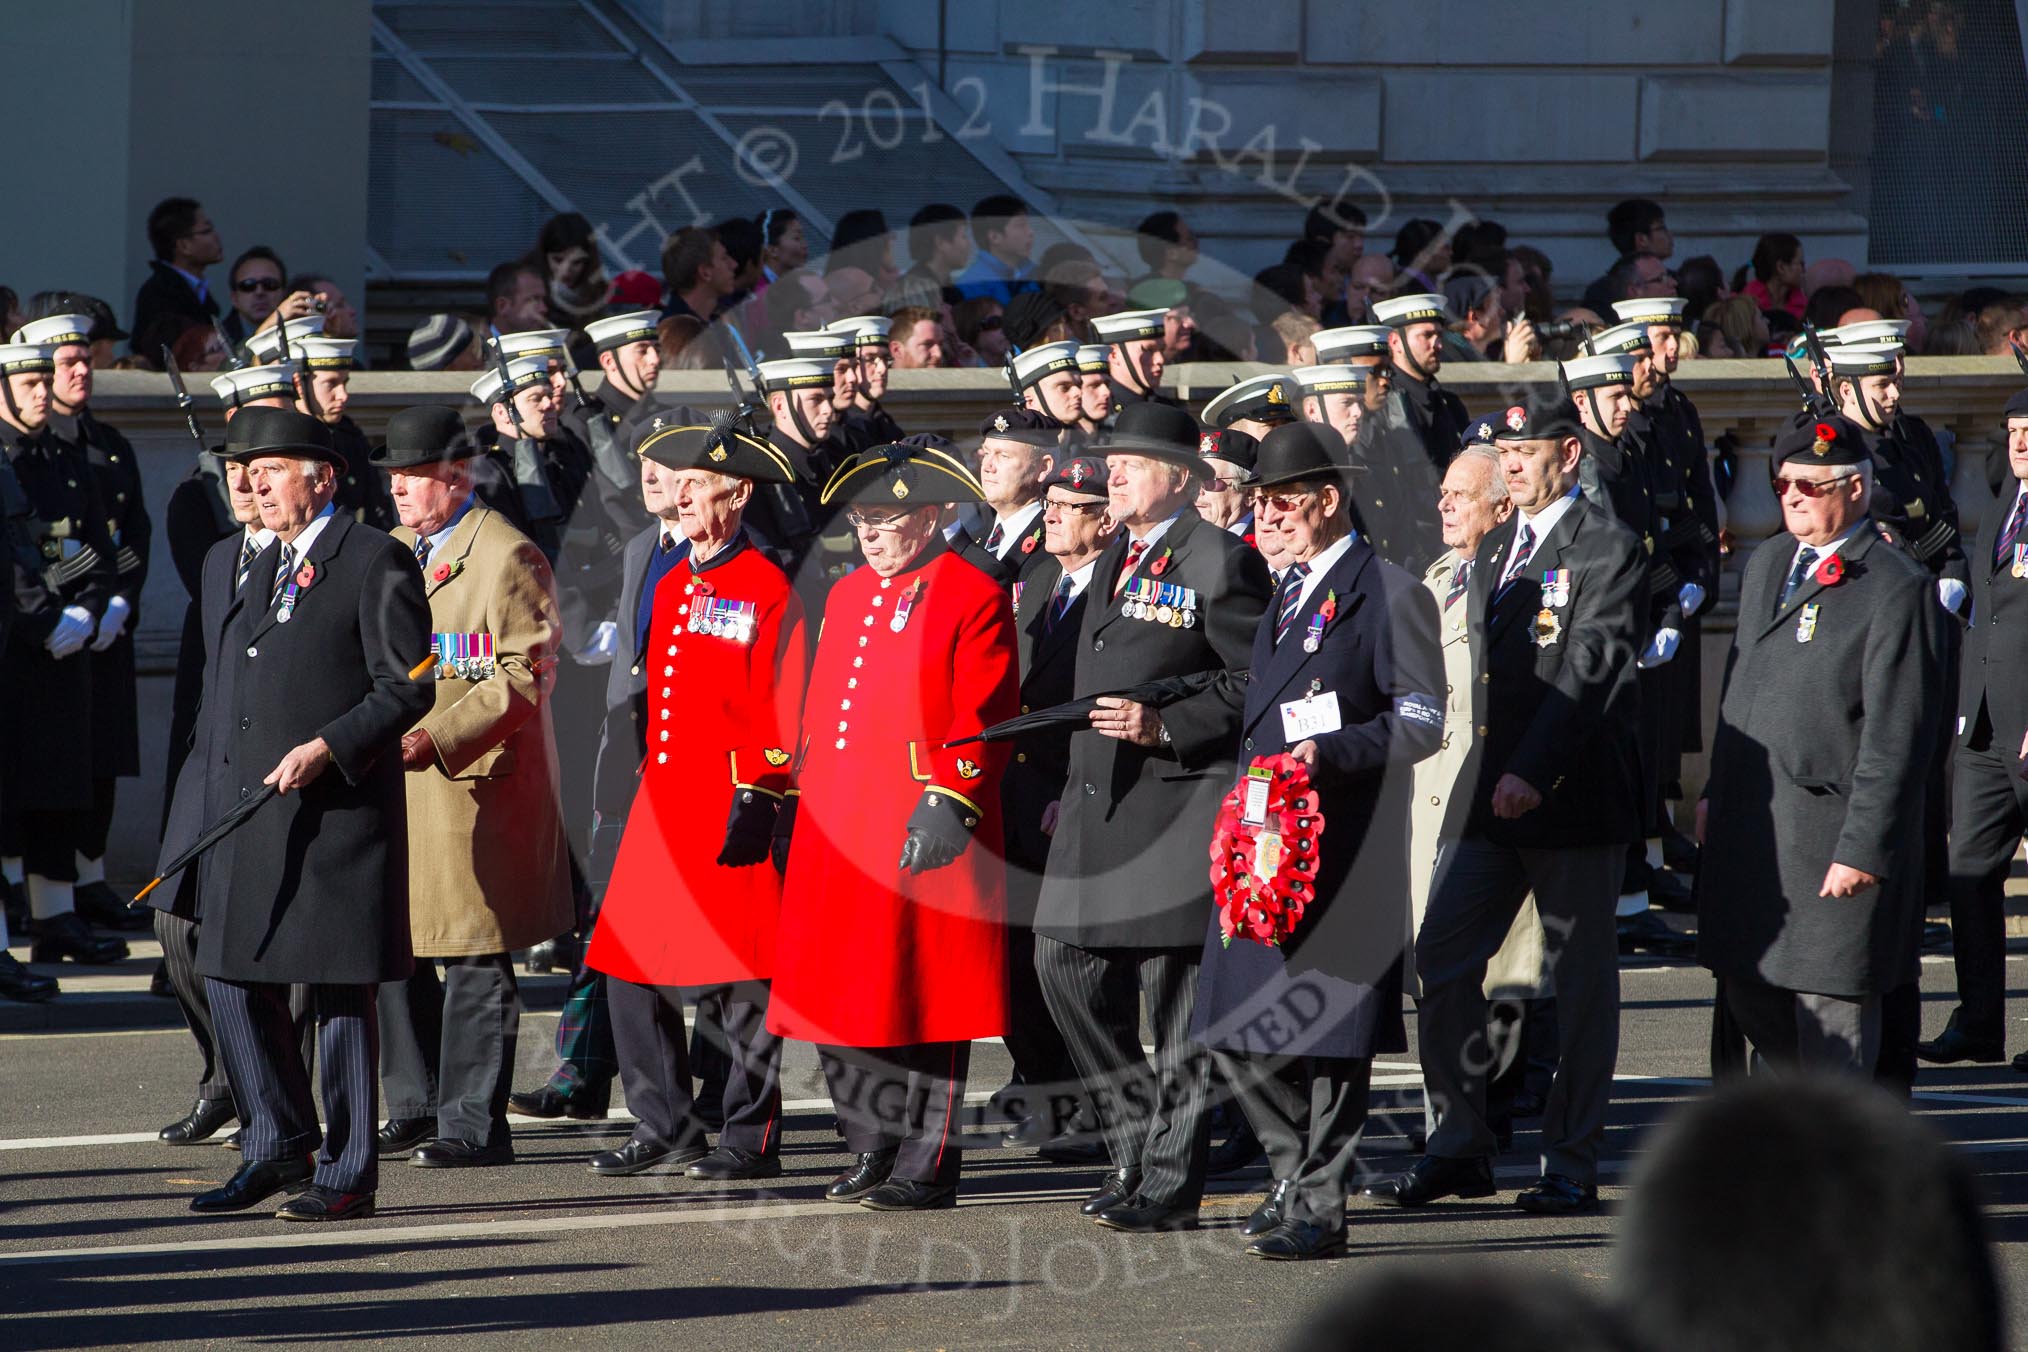 Remembrance Sunday 2012 Cenotaph March Past: Group B31 - Royal Army Service Corps & Royal Corps of Transport Association..
Whitehall, Cenotaph,
London SW1,

United Kingdom,
on 11 November 2012 at 11:59, image #1015